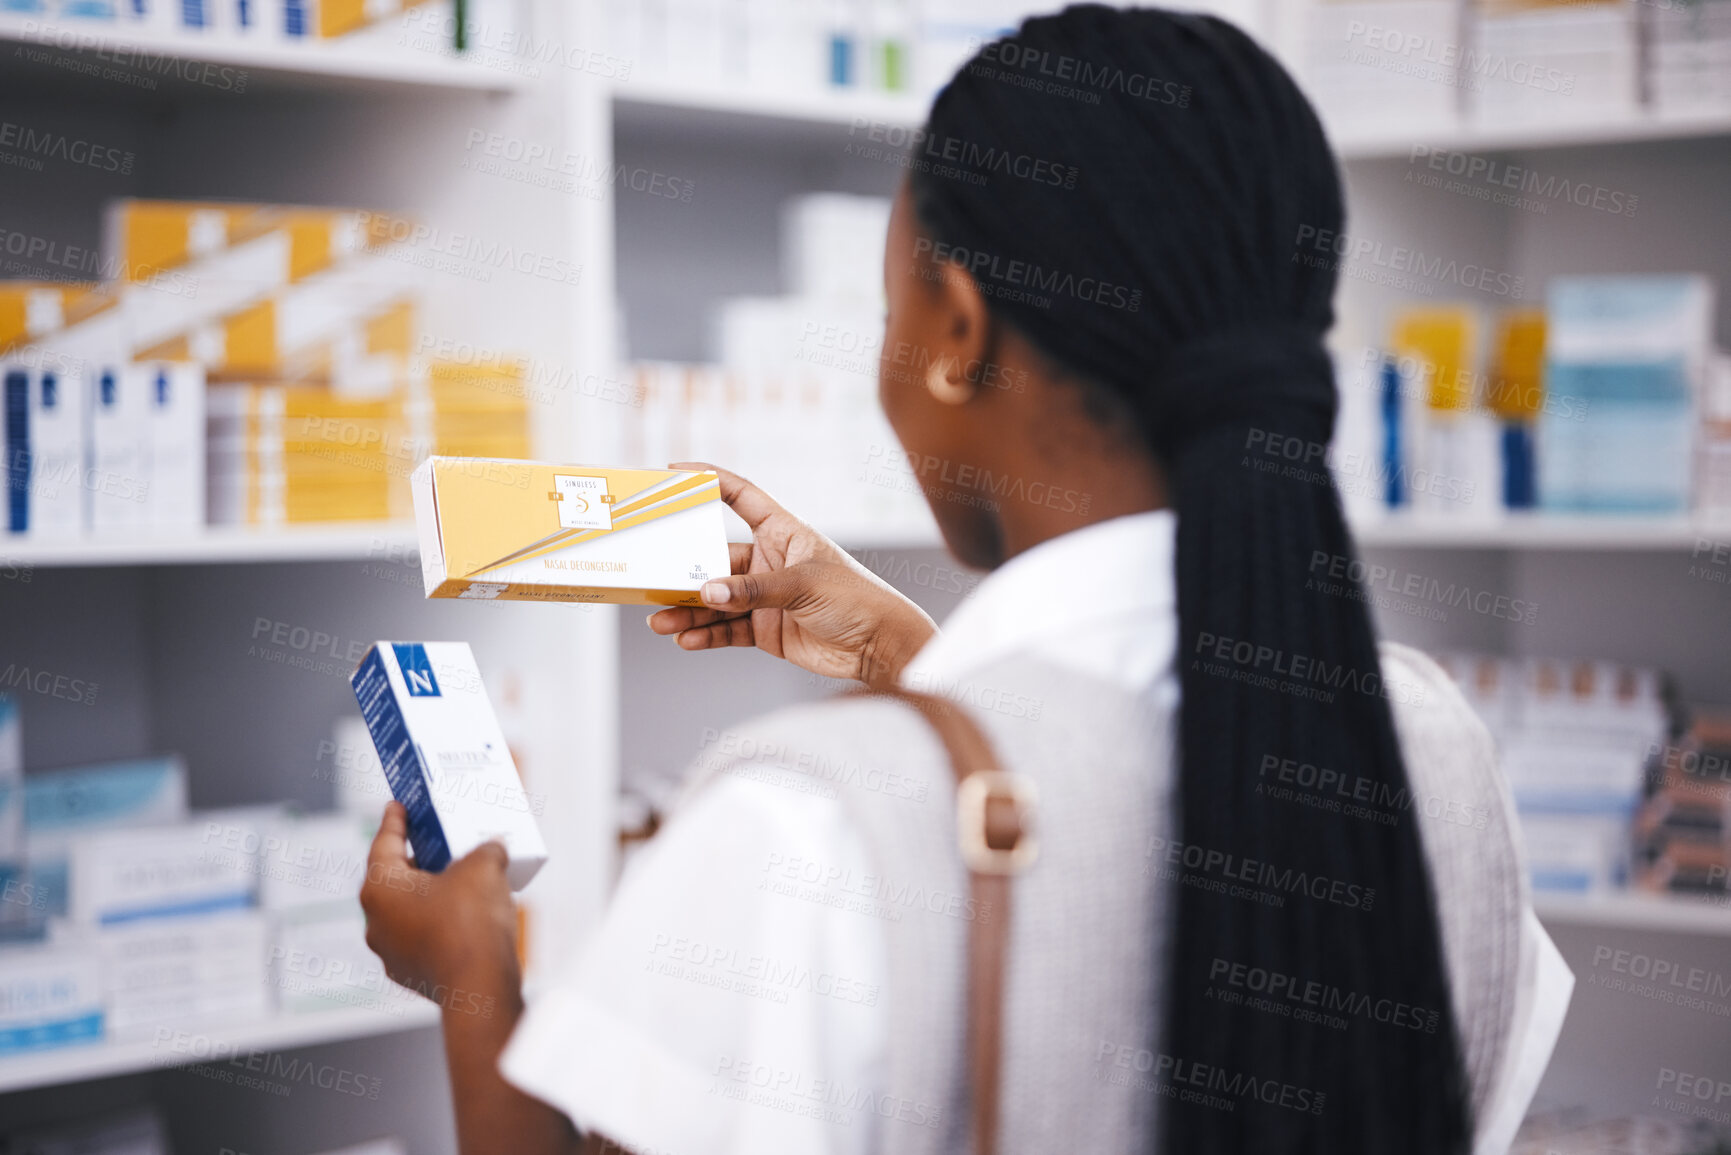 Buy stock photo Pharmacy stock, woman and medicine check of a customer in a healthcare and wellness store. Medical, inventory and pharmaceutical label information checking of a black female person back by shop shelf